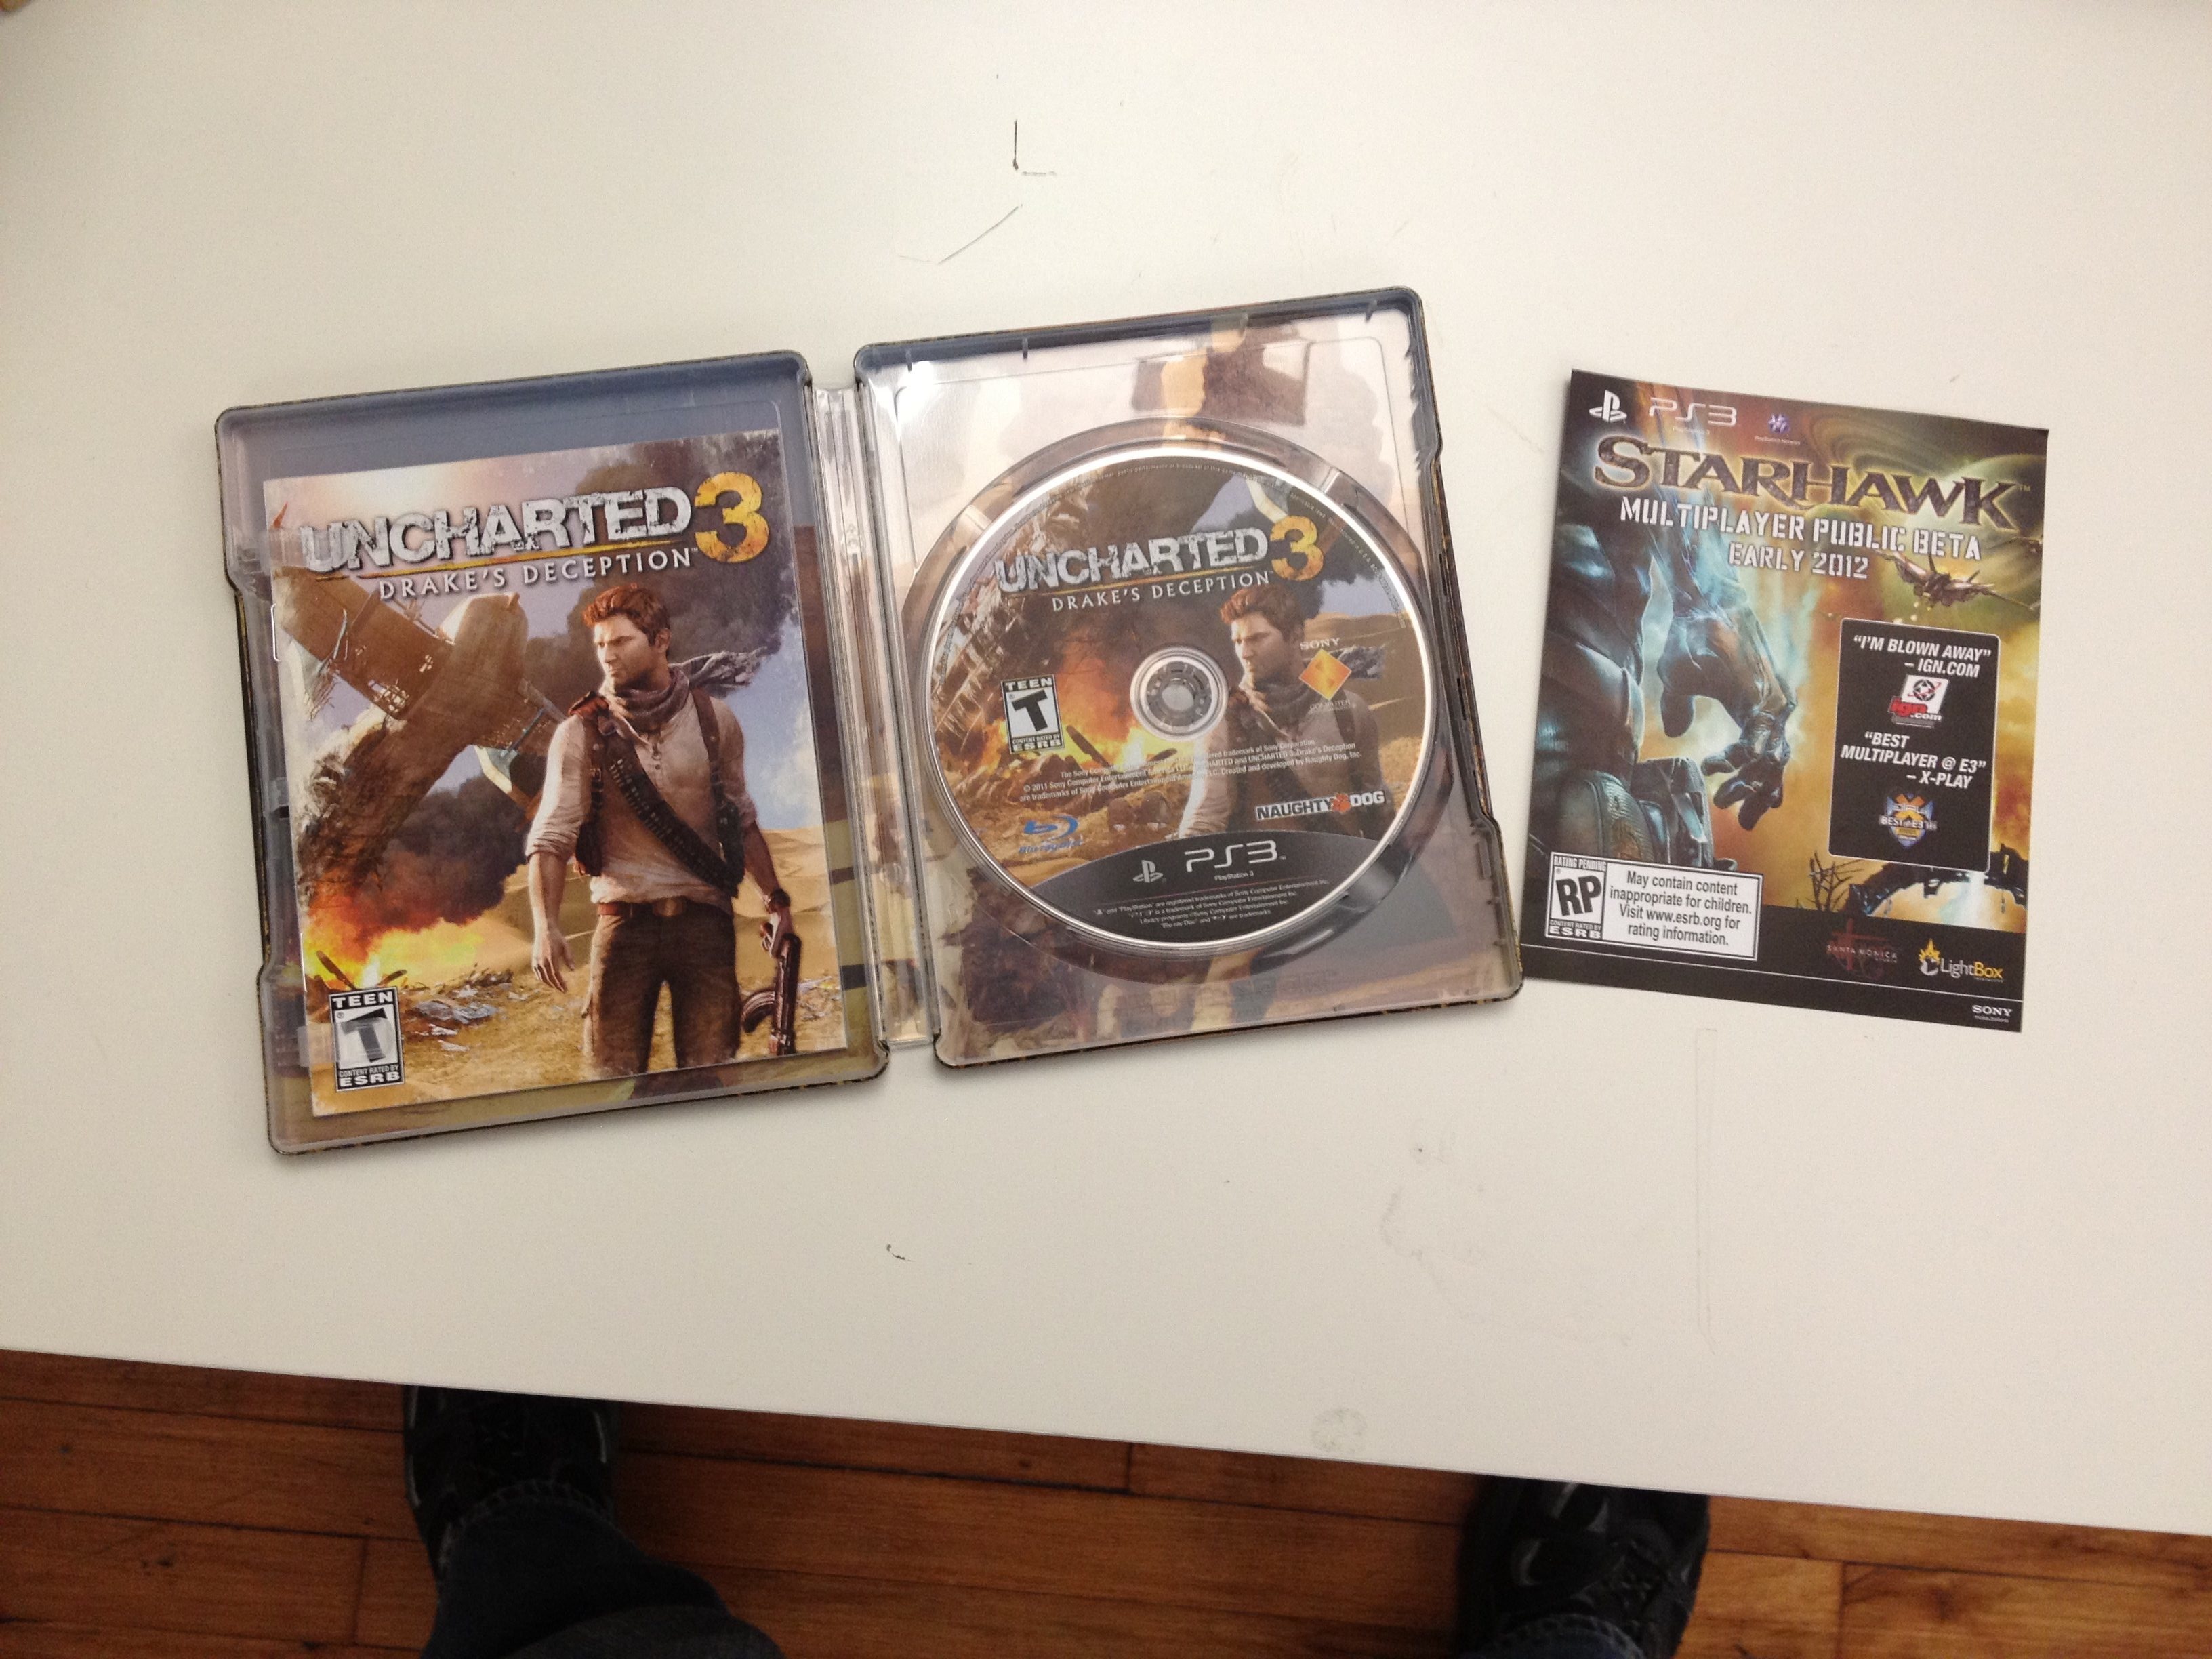 Game Editions - Uncharted 3 Guide - IGN